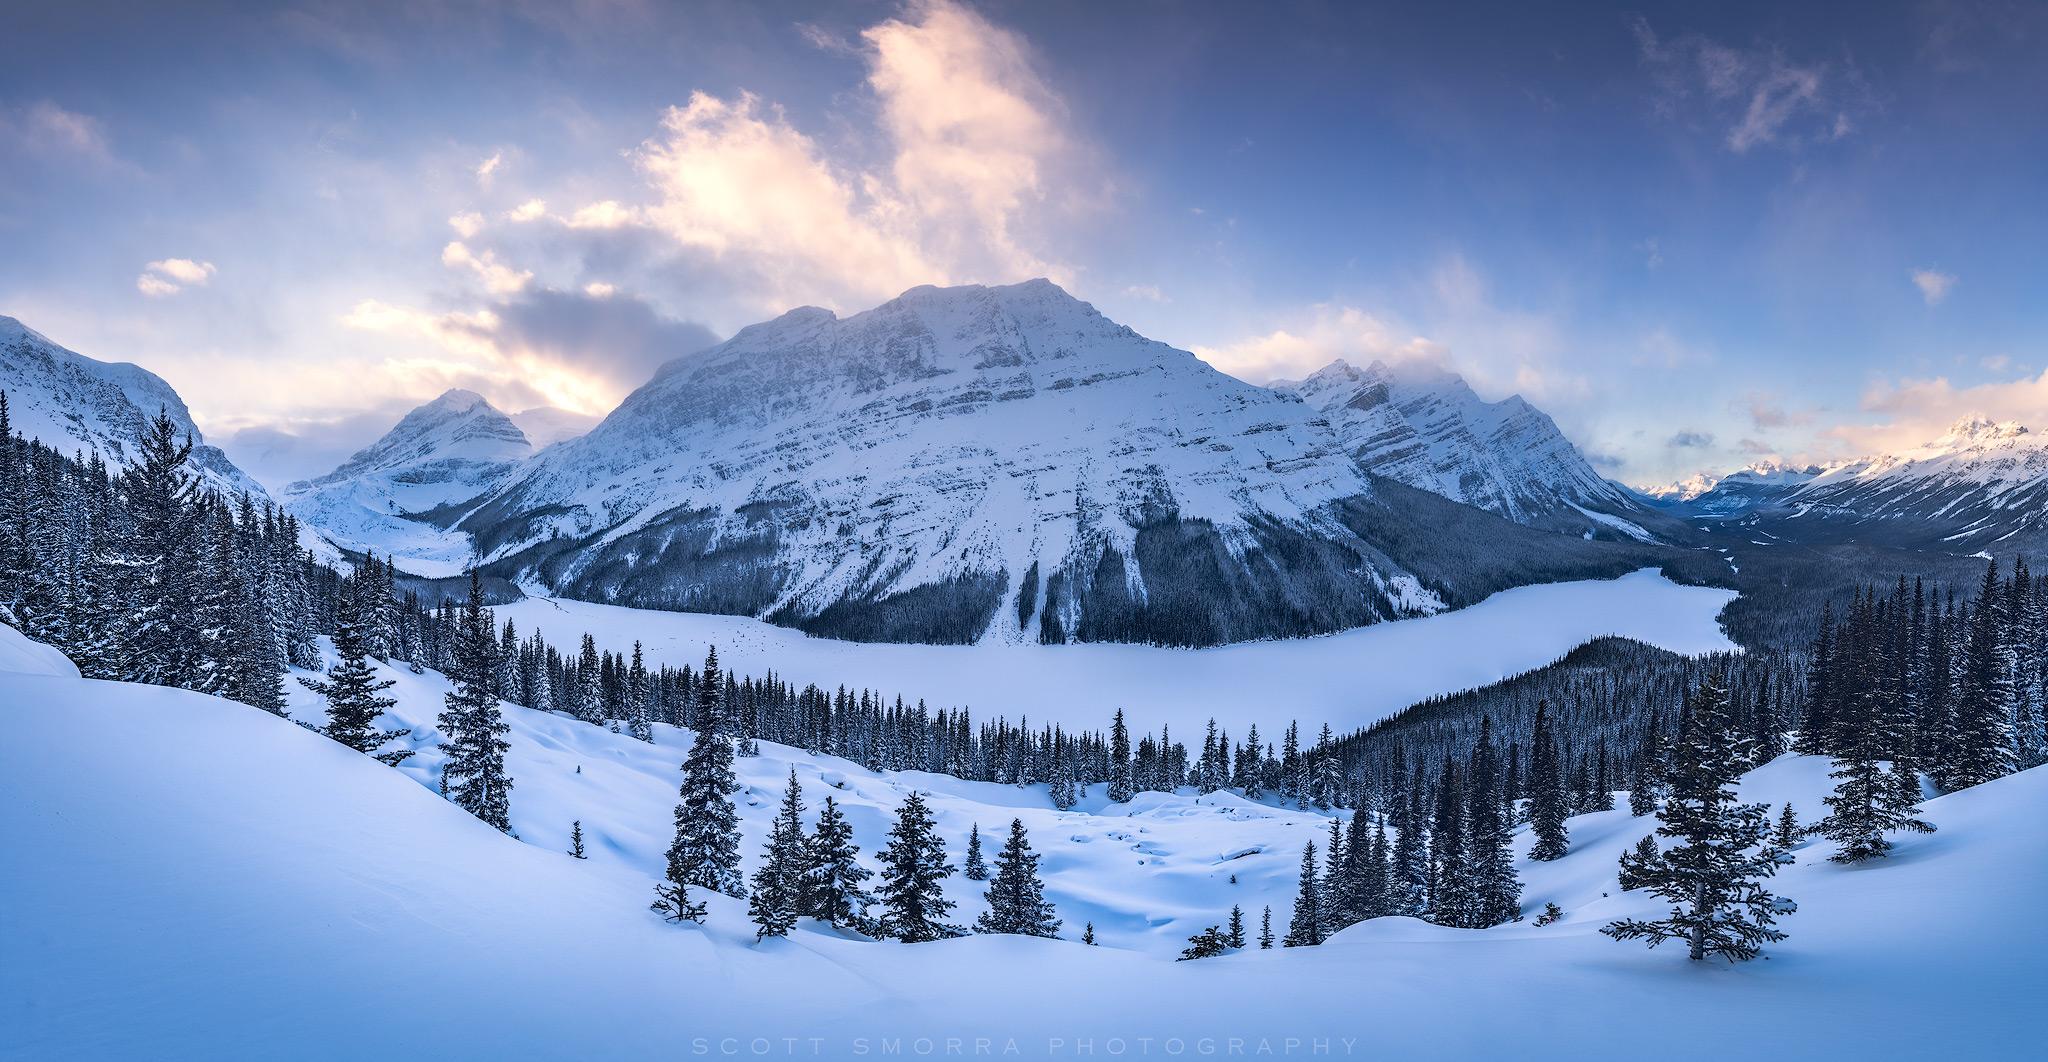 How To Photograph The Canadian Rockies In Winter Scott Smorra